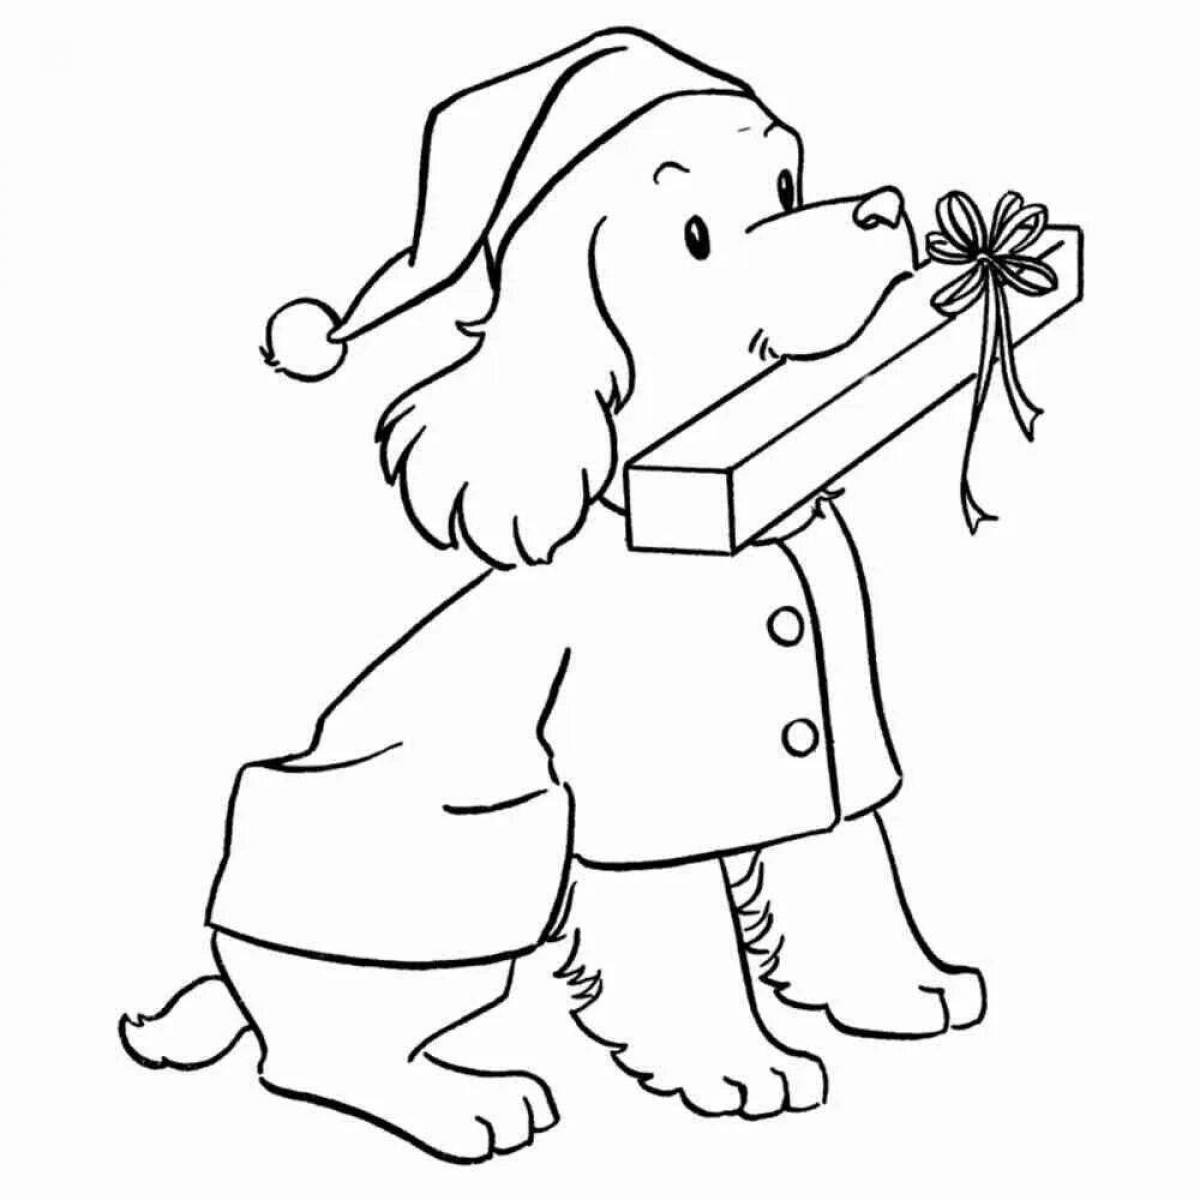 Exquisite dog Christmas coloring book